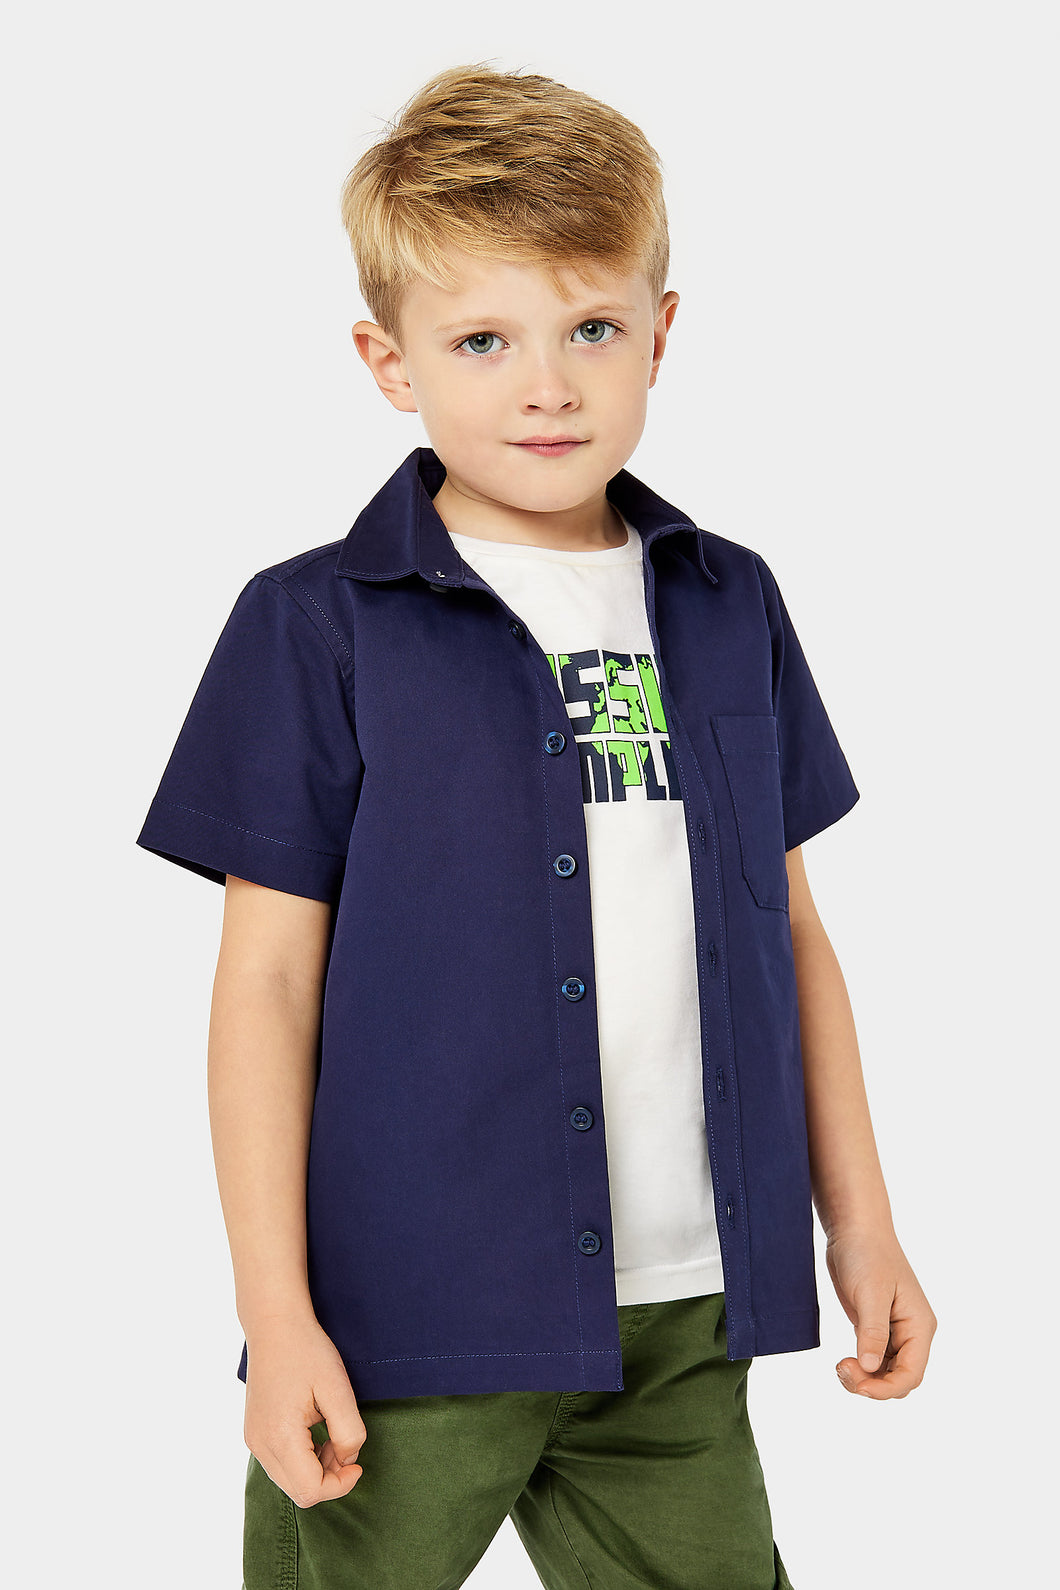 Mothercare Mission Complete Shirt and T-Shirt Set